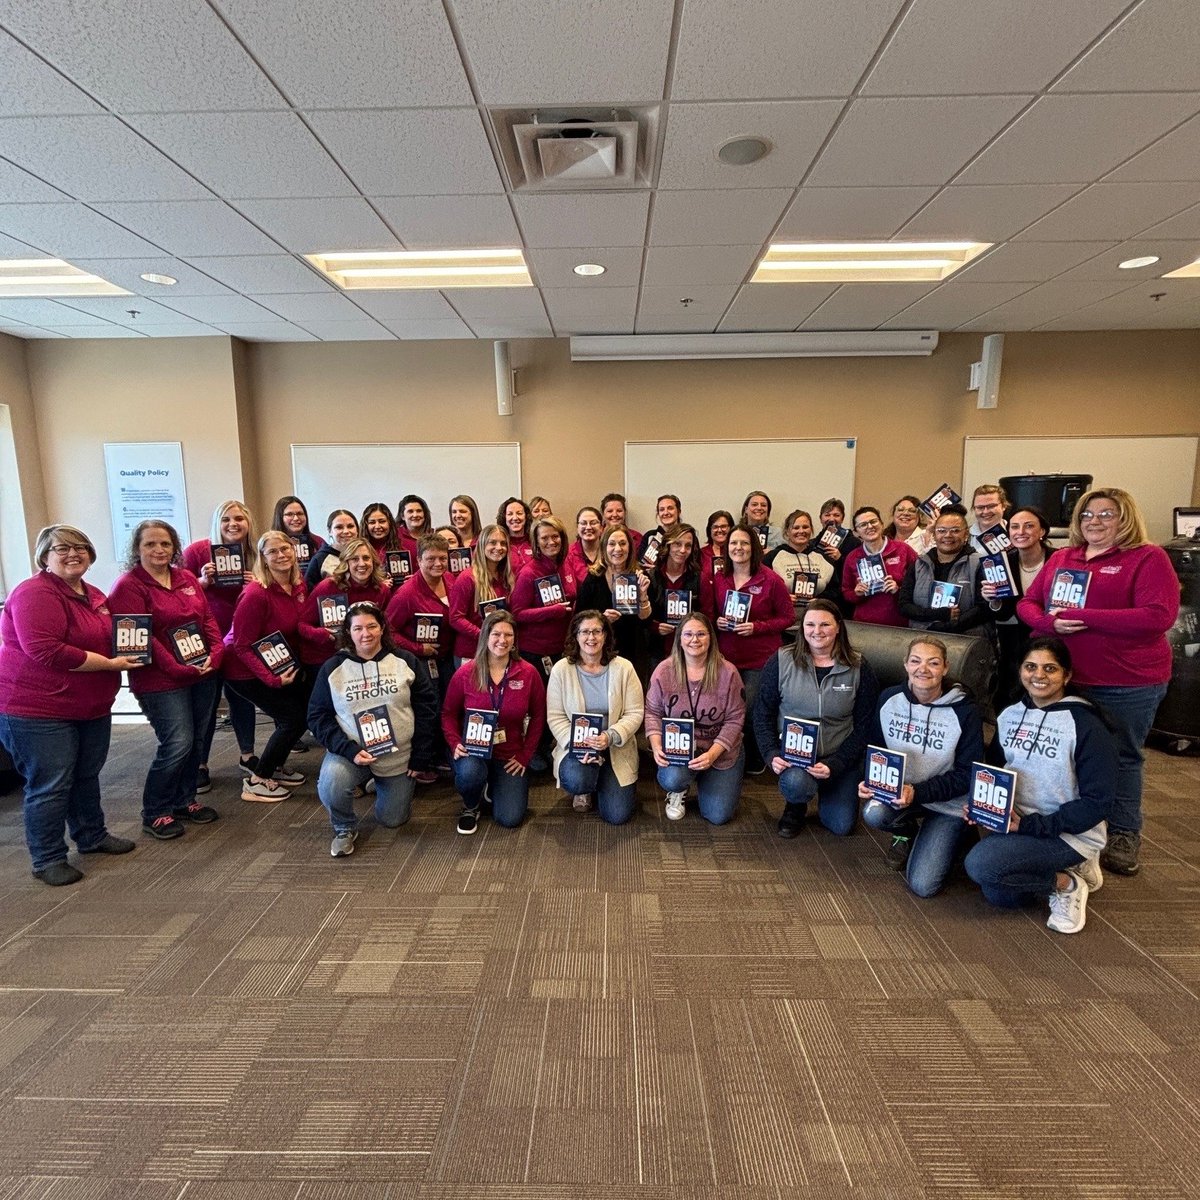 Another awesome professional development opportunity for some of the members of the Bradford White Women's Network! The seminar was led by Cynthia Kay and fostered powerful conversations about communication in the workplace.
#BradfordWhiteWaterHeaters #WomensNetwork